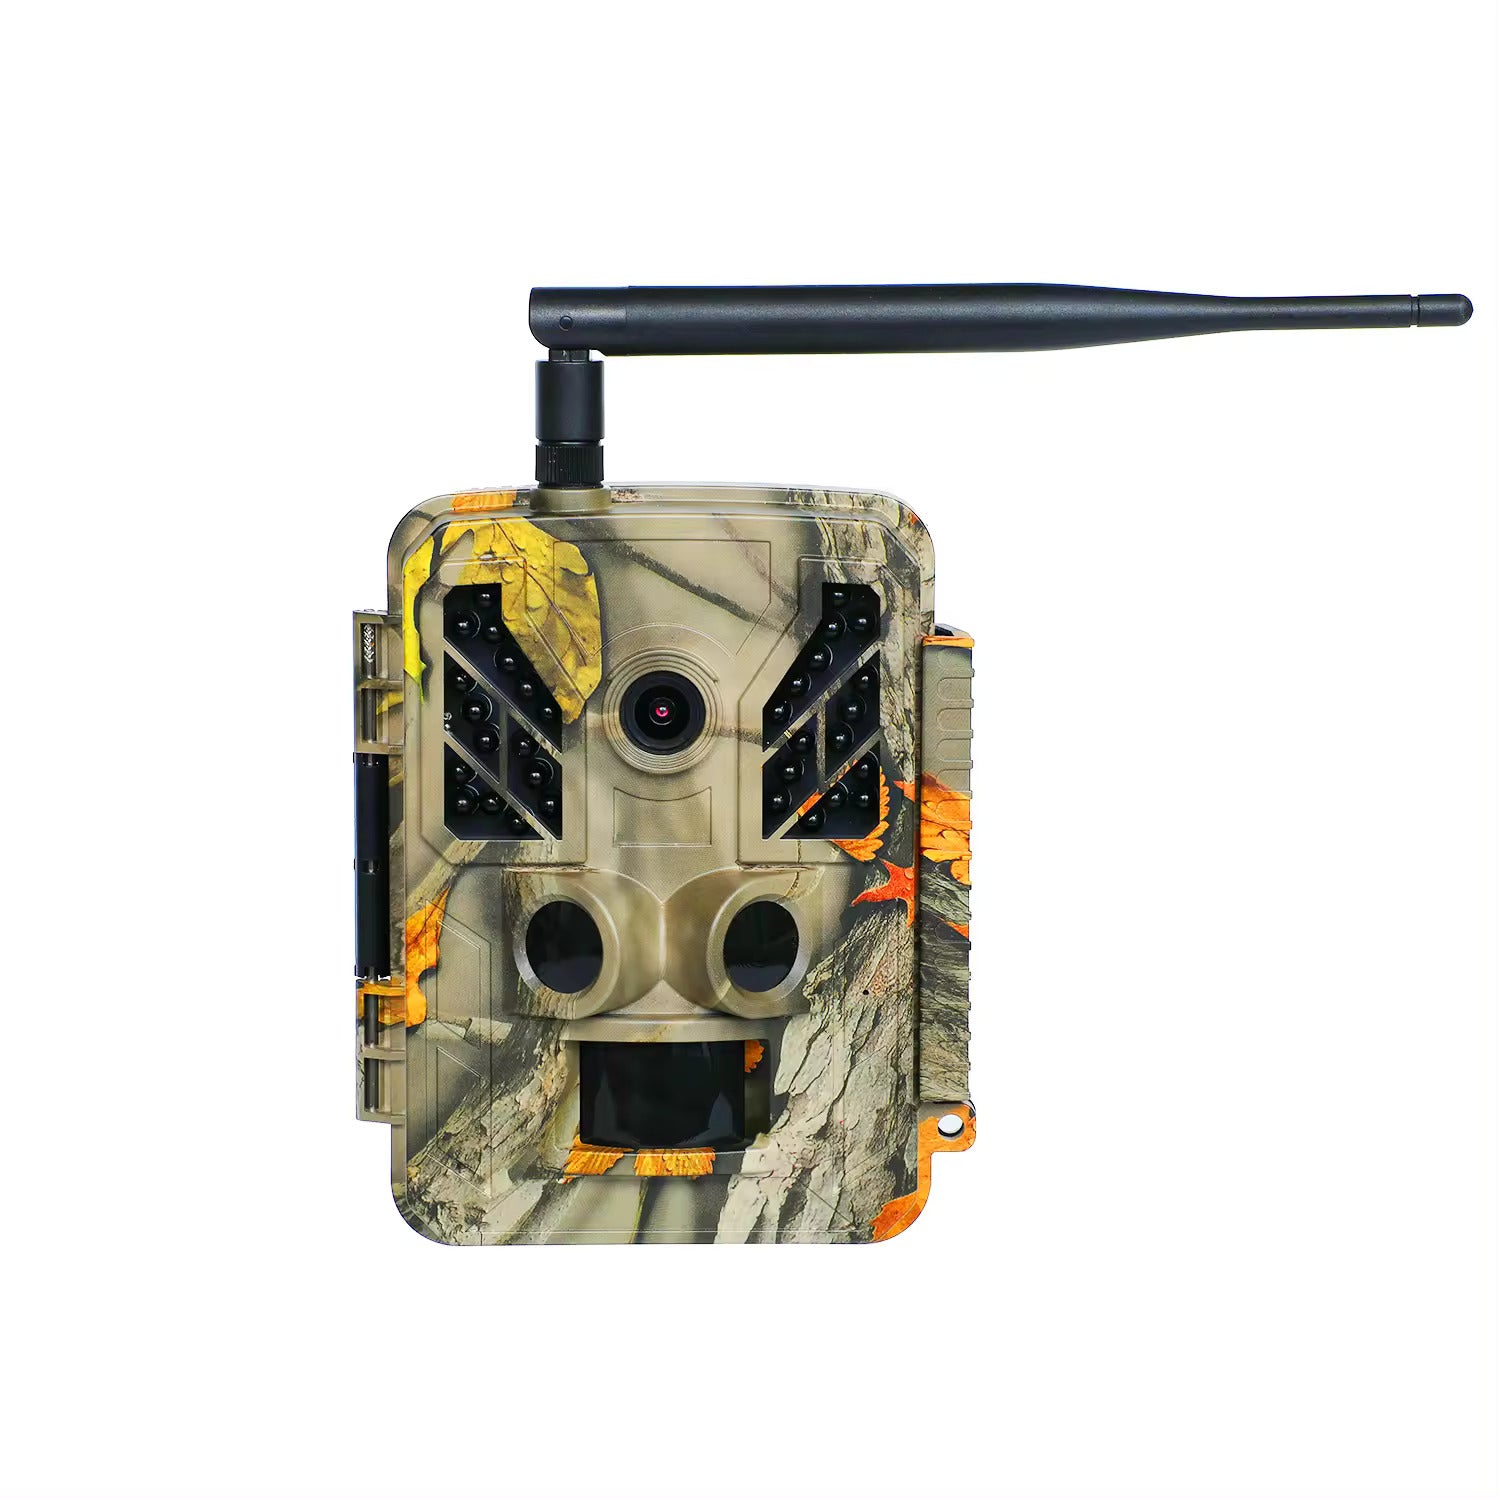 Seamlessly capture the wonders of nature with this robust wildlife camera, expertly camouflaged to document the beauty of the animal kingdom undetected.